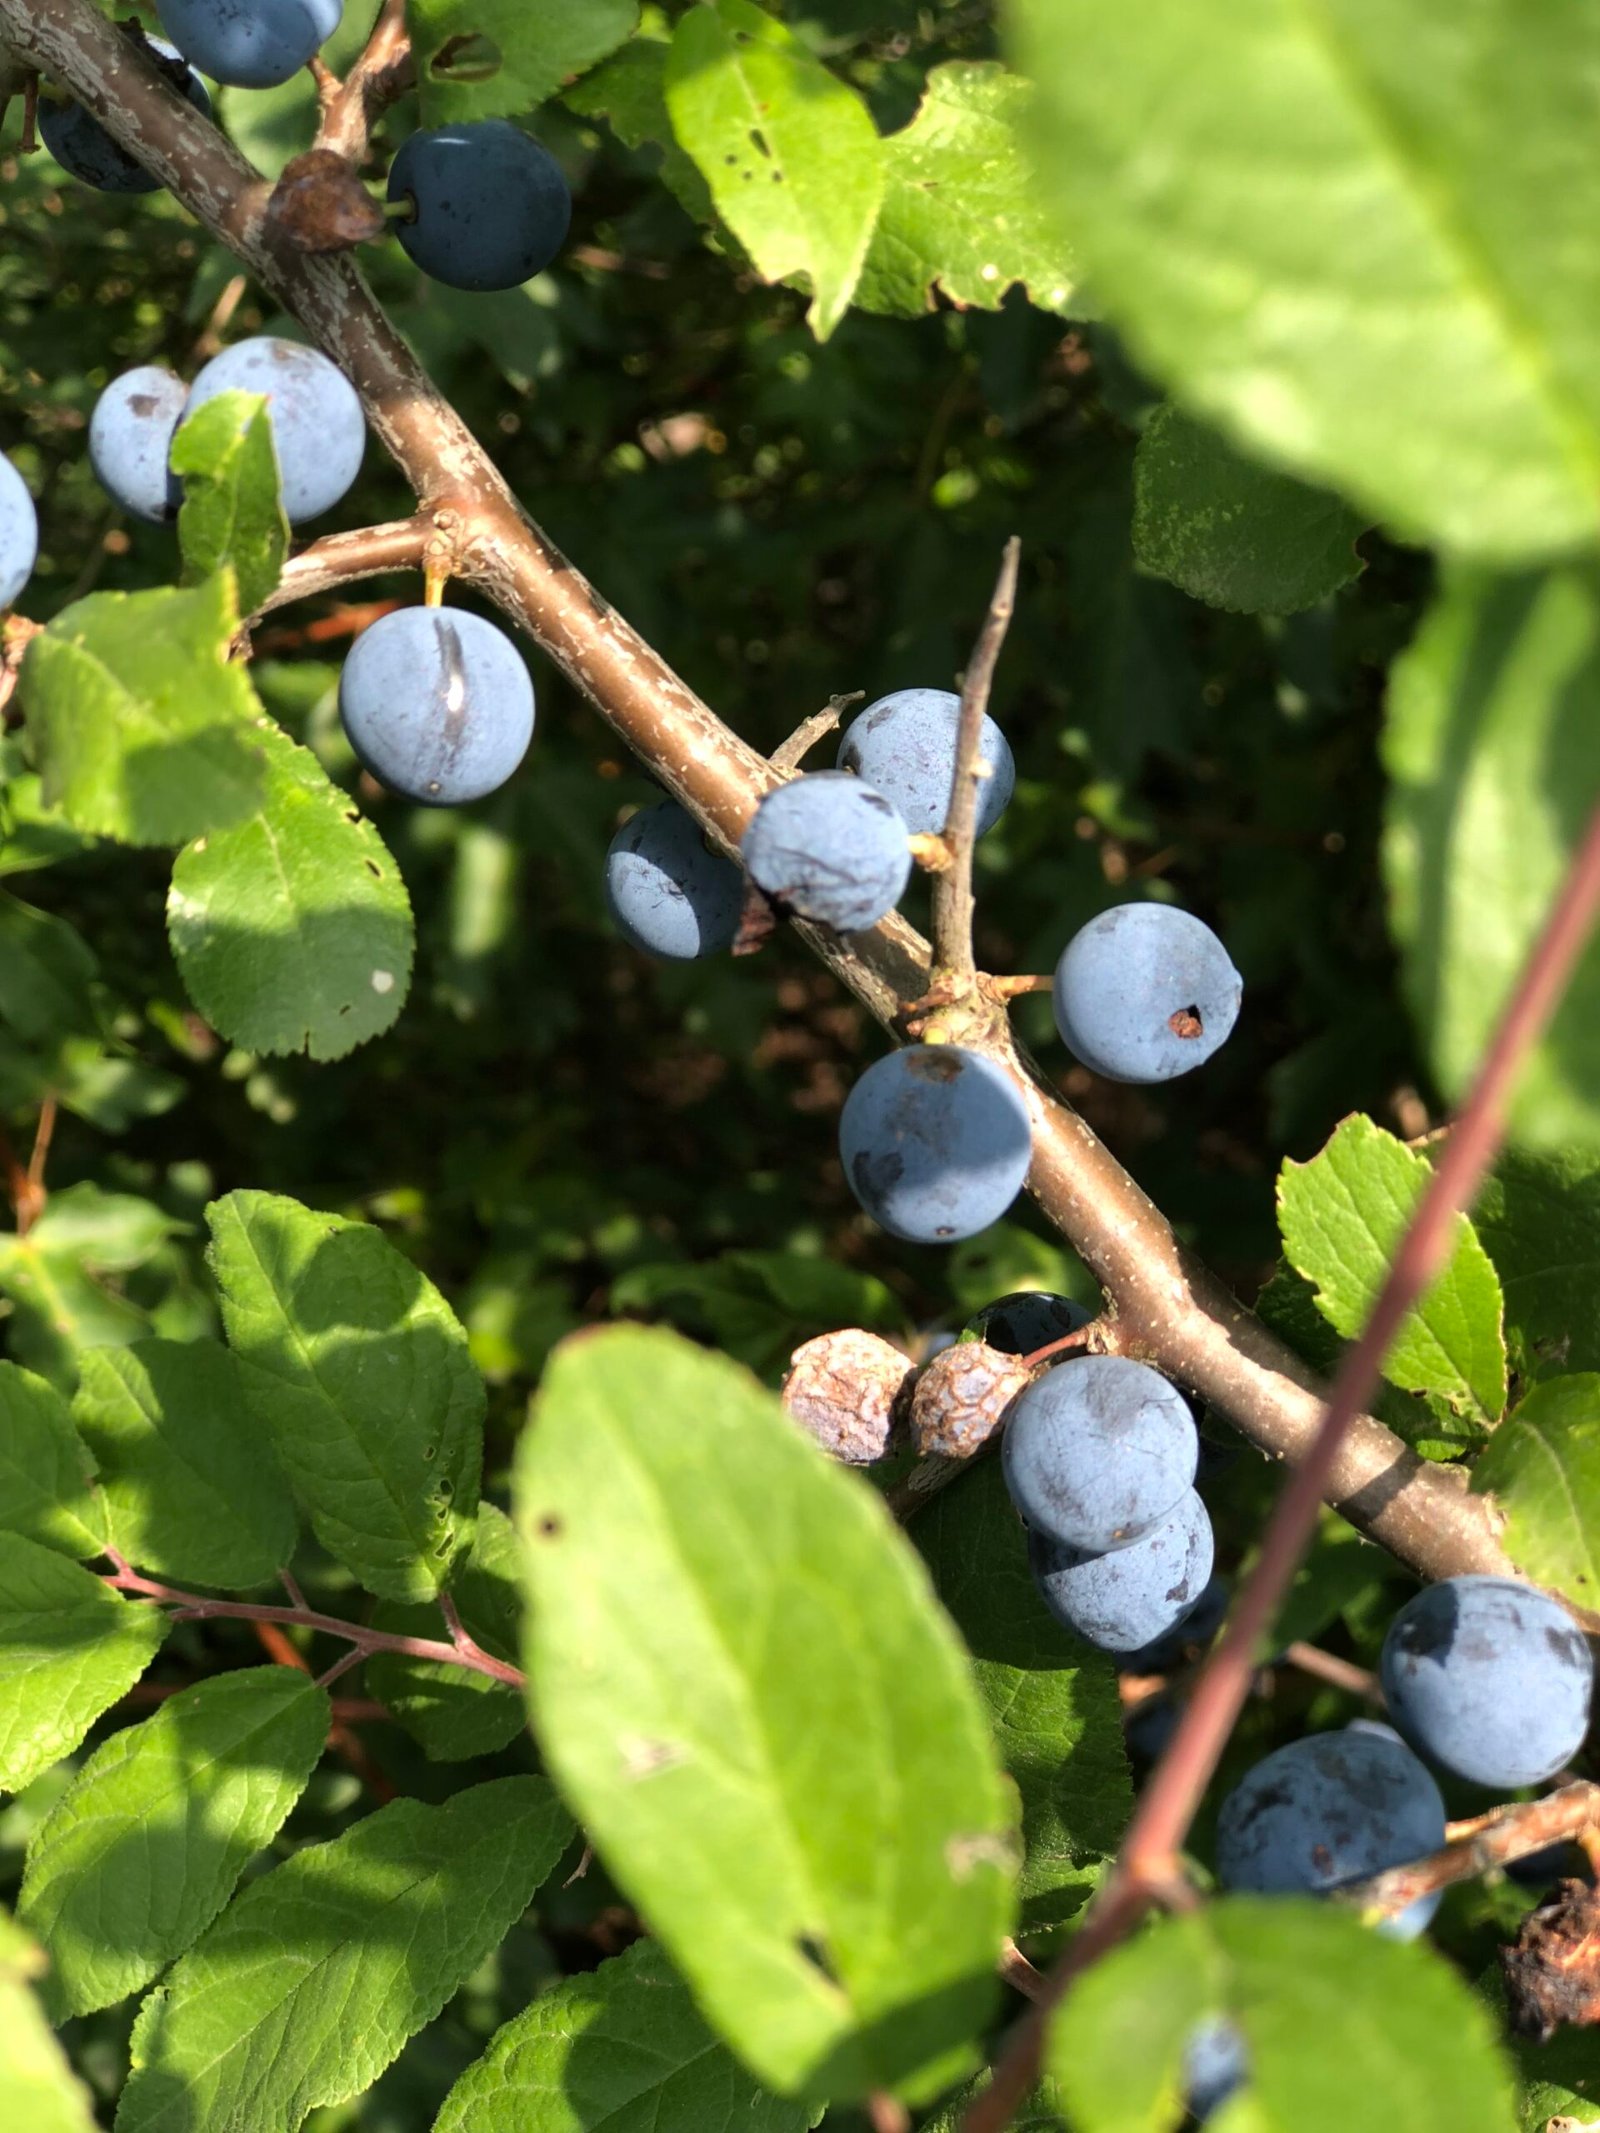 Sloe berries on the branch ripening in the sun